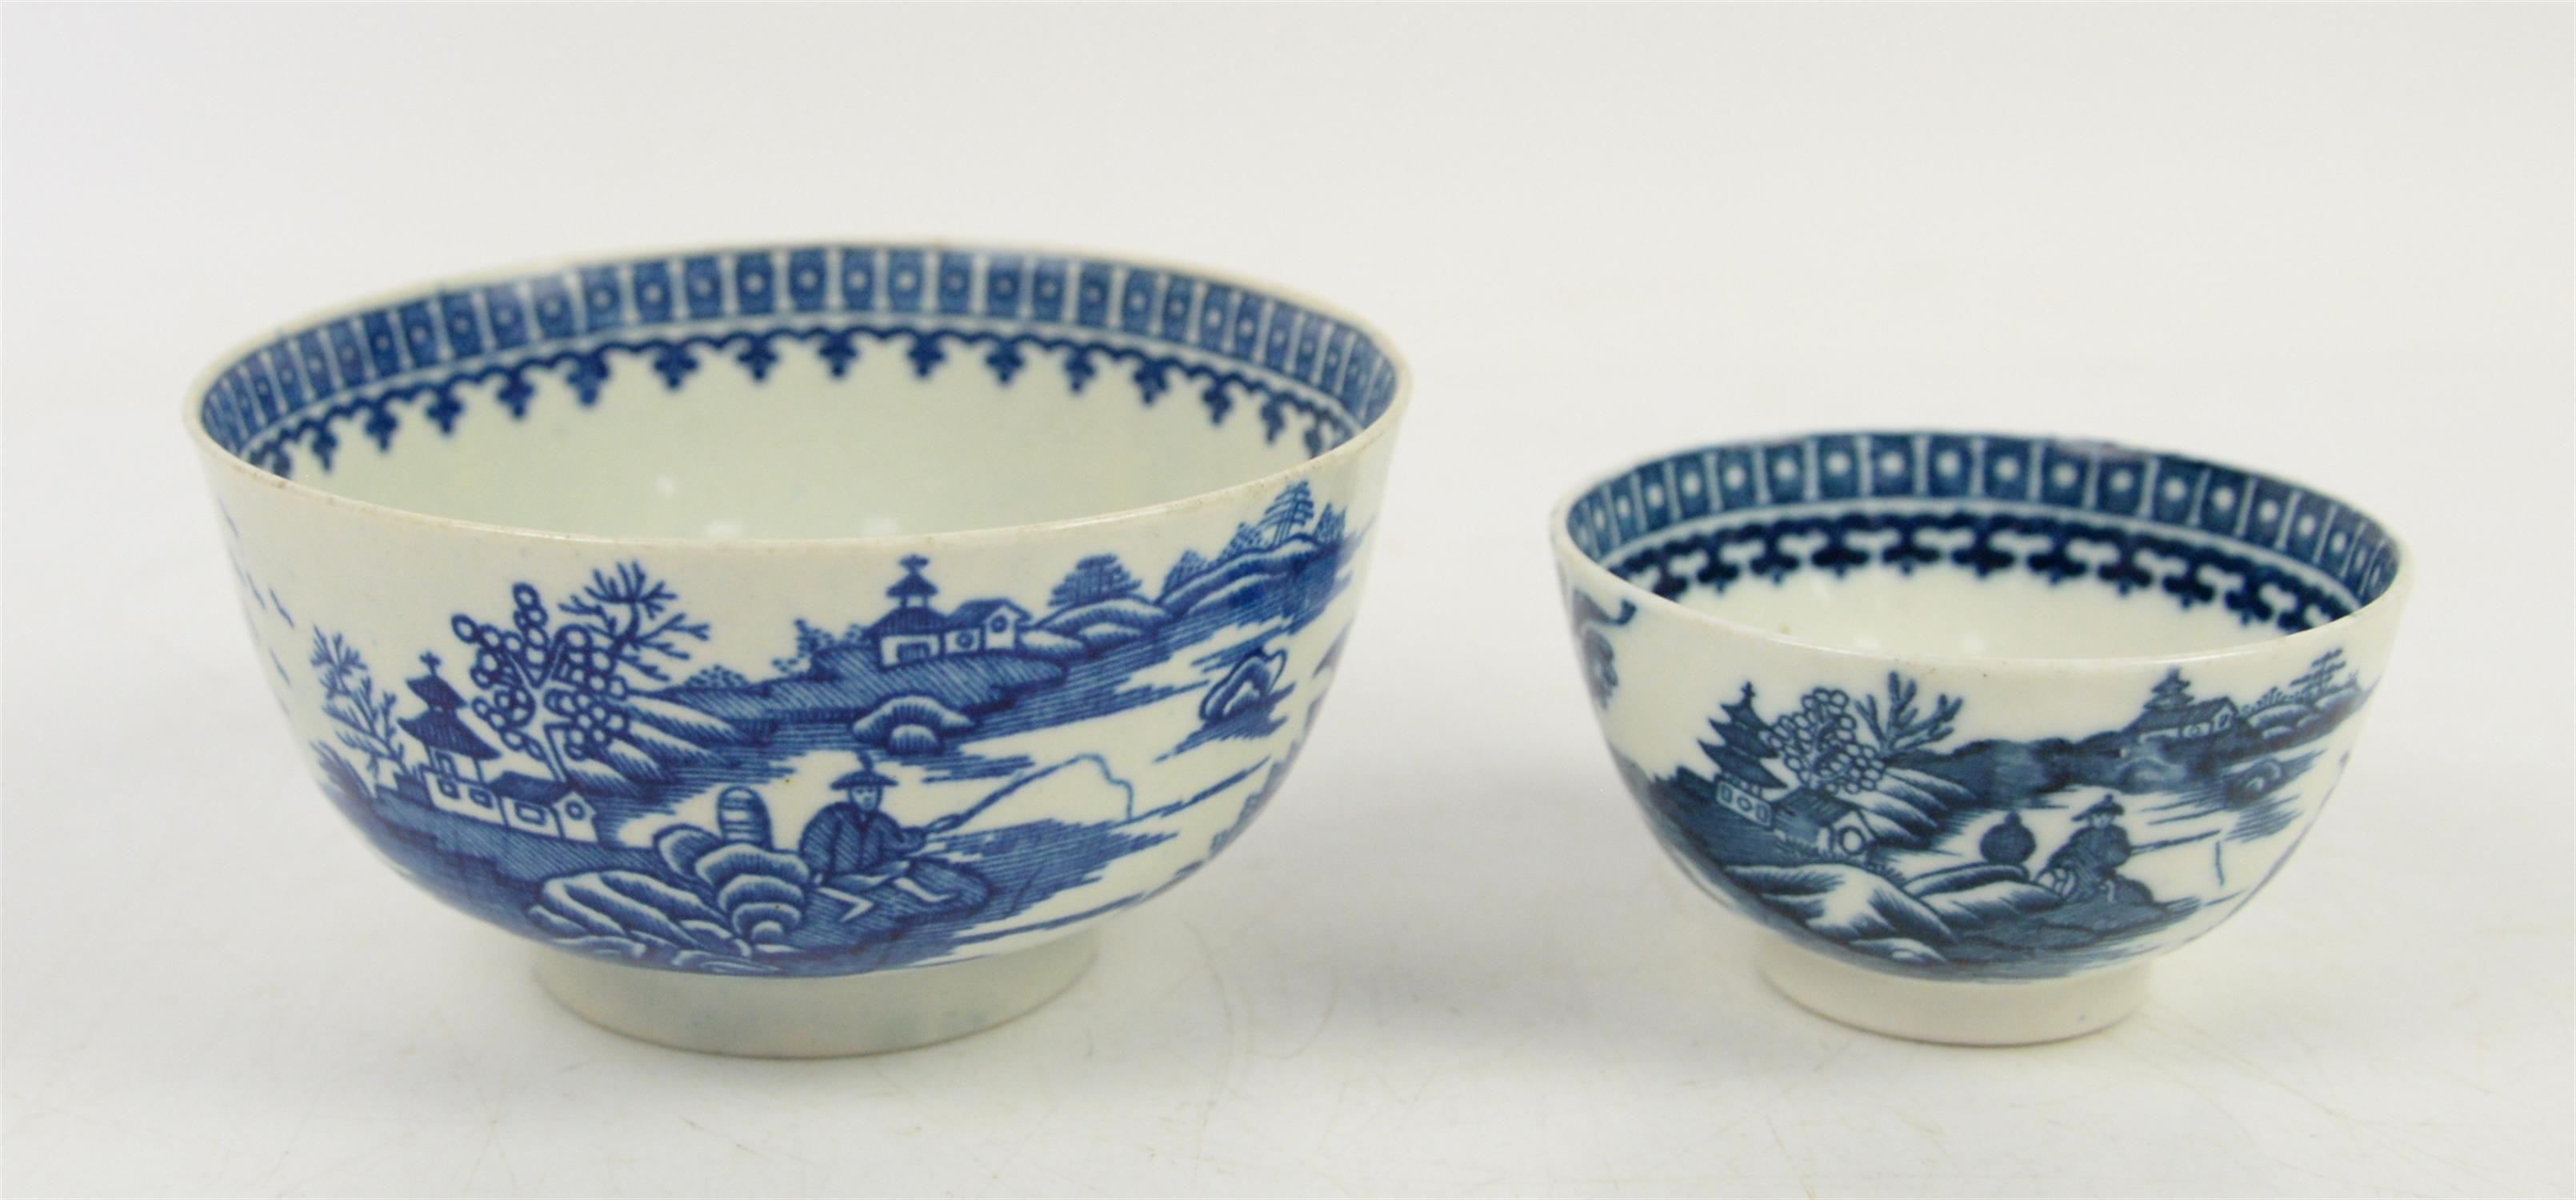 18th century Caughley cormorant pattern blue and white teabowl, h4.5cm, and a similar bowl, h6.5cm